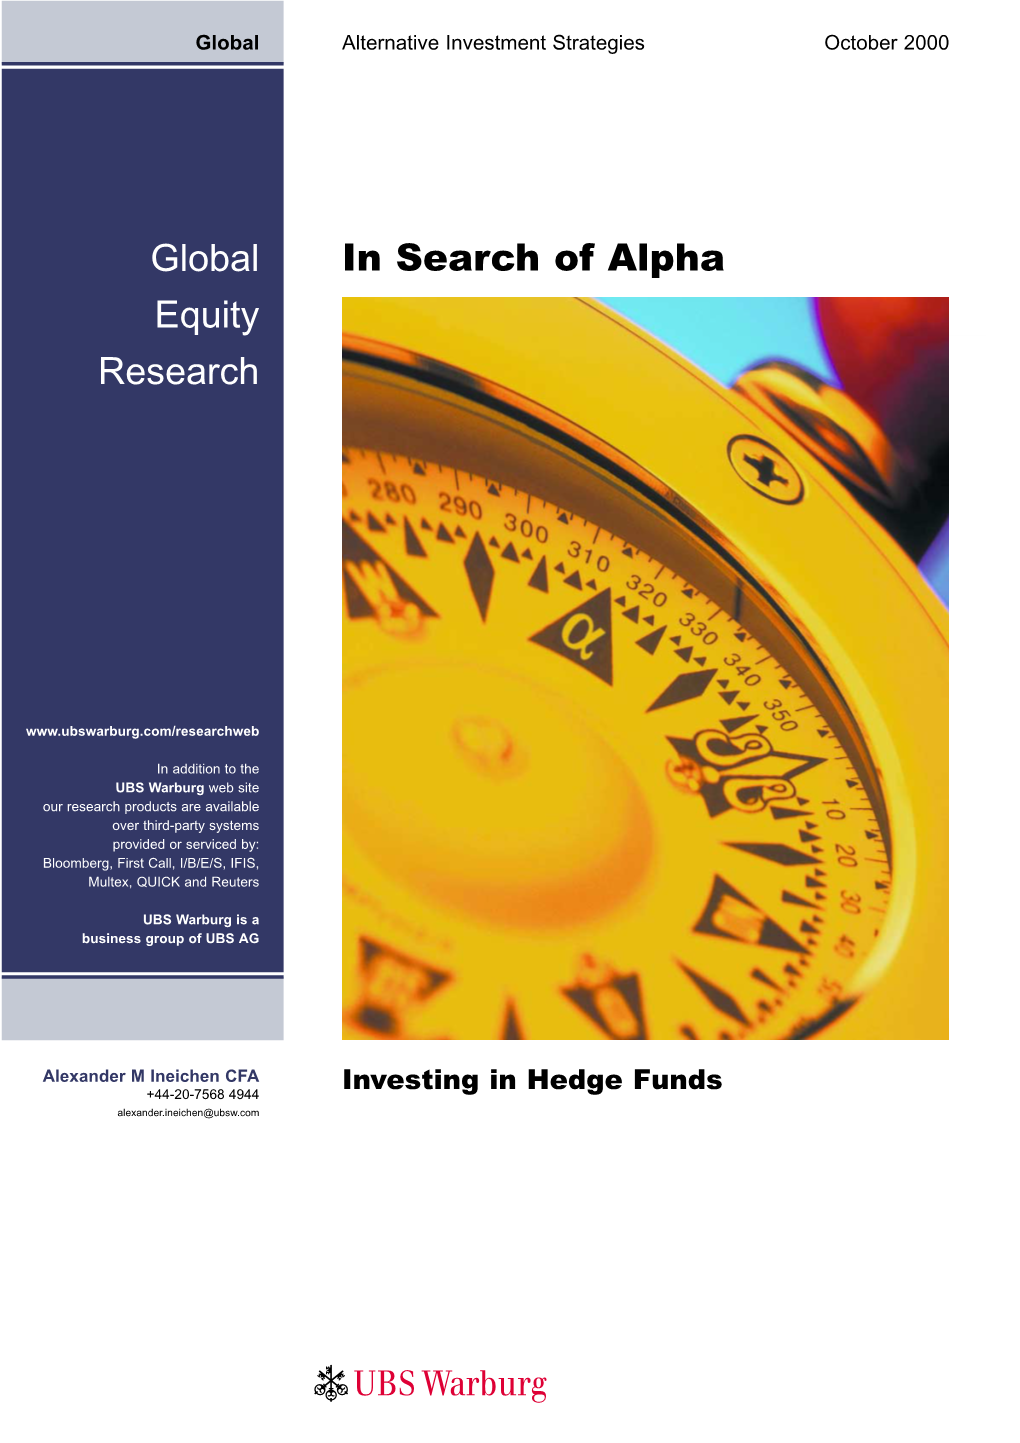 Global Equity Research in Search of Alpha